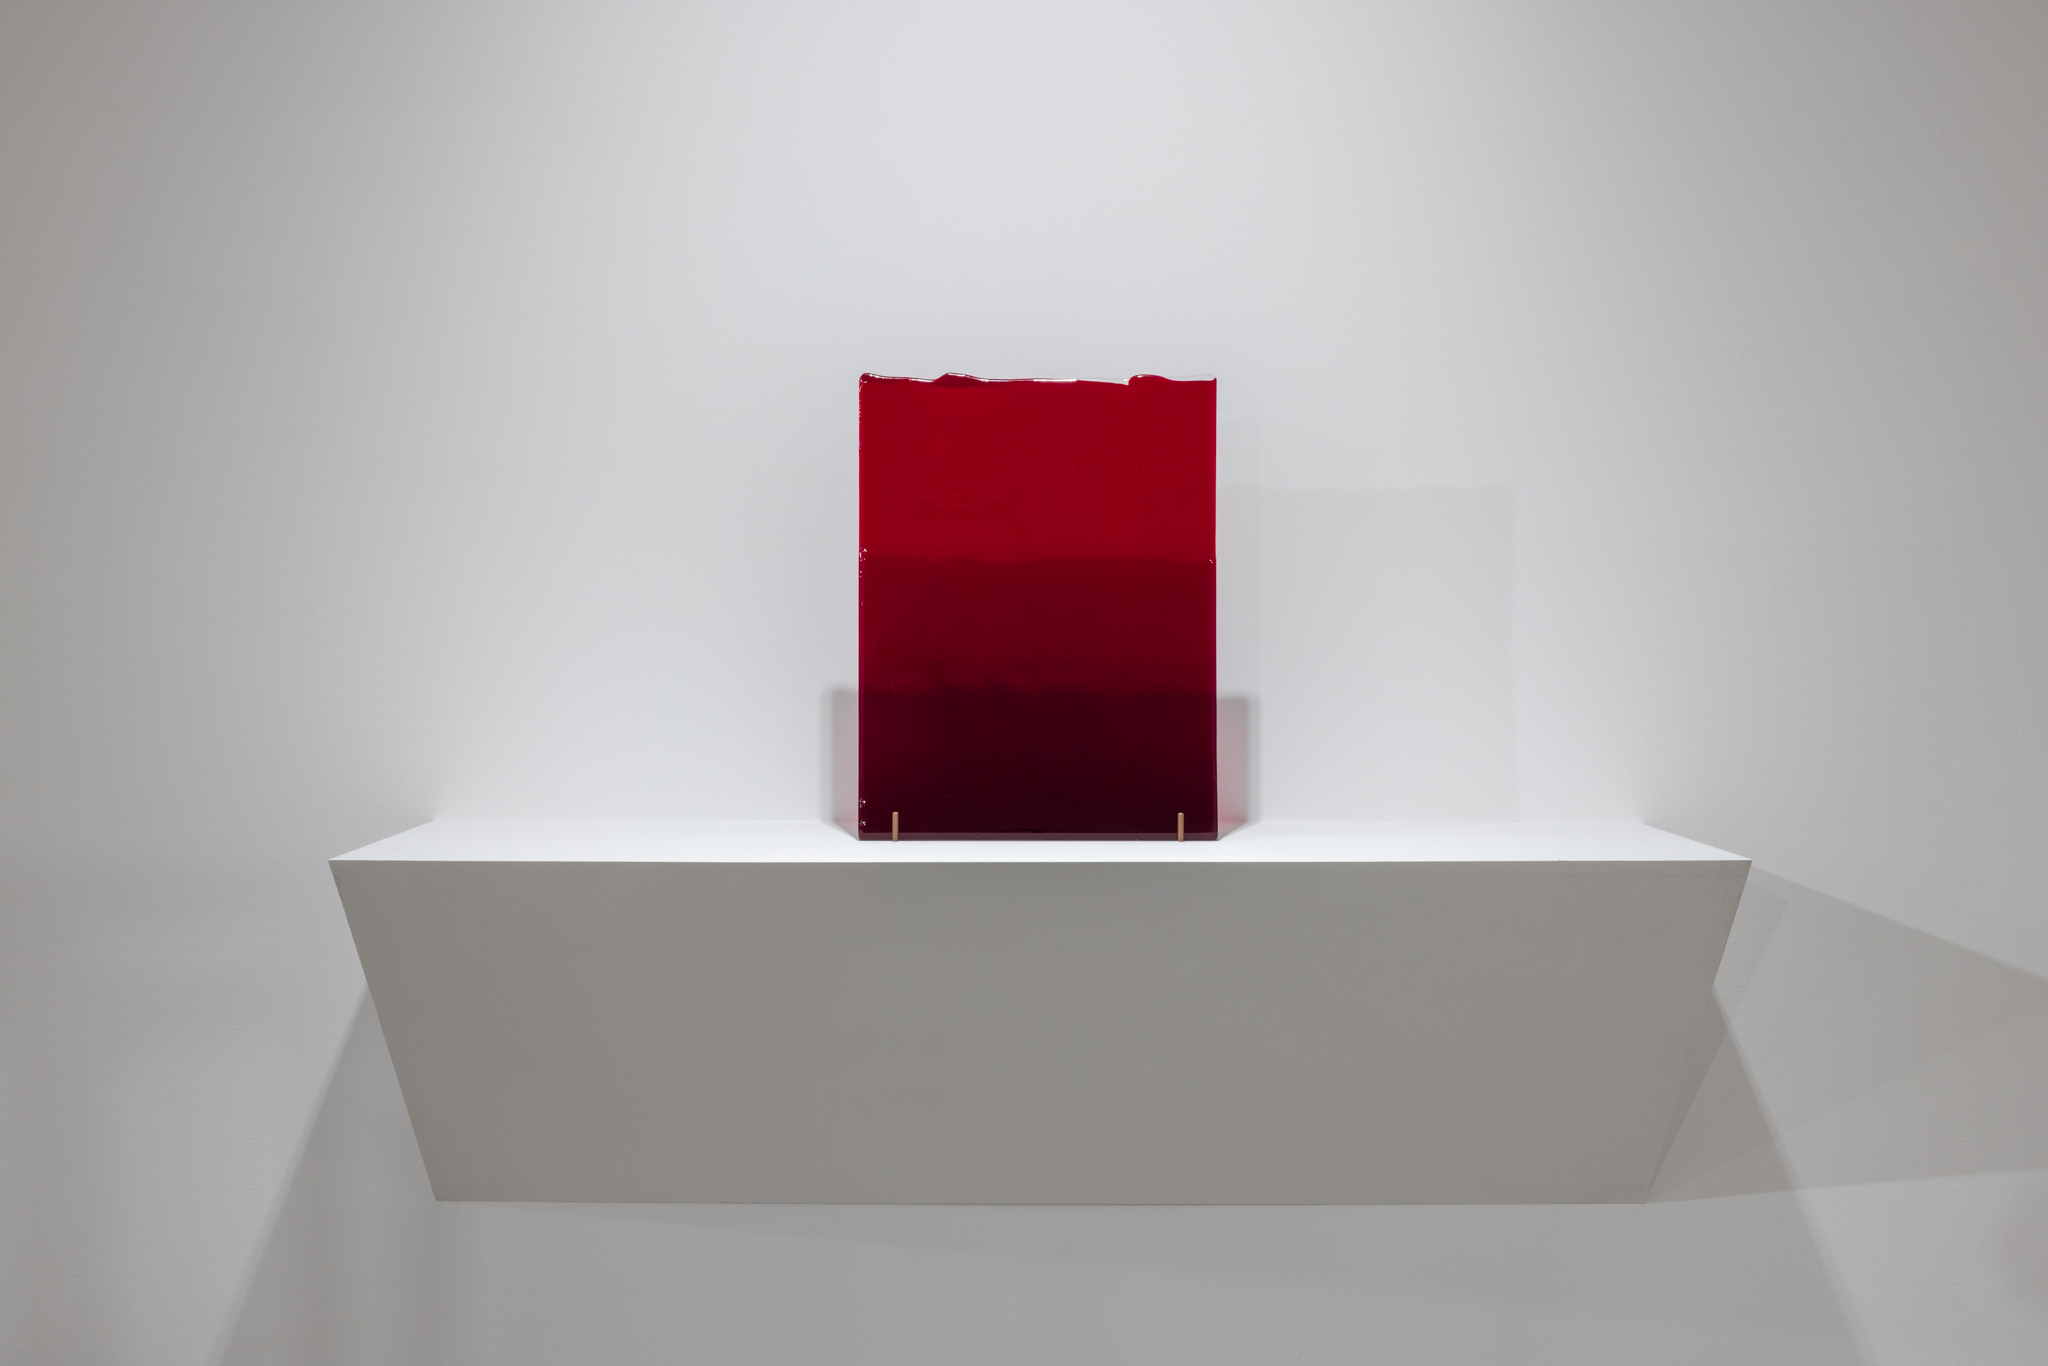 unswgalleries_glass_181022_credit_jacquiemanning-26.jpg